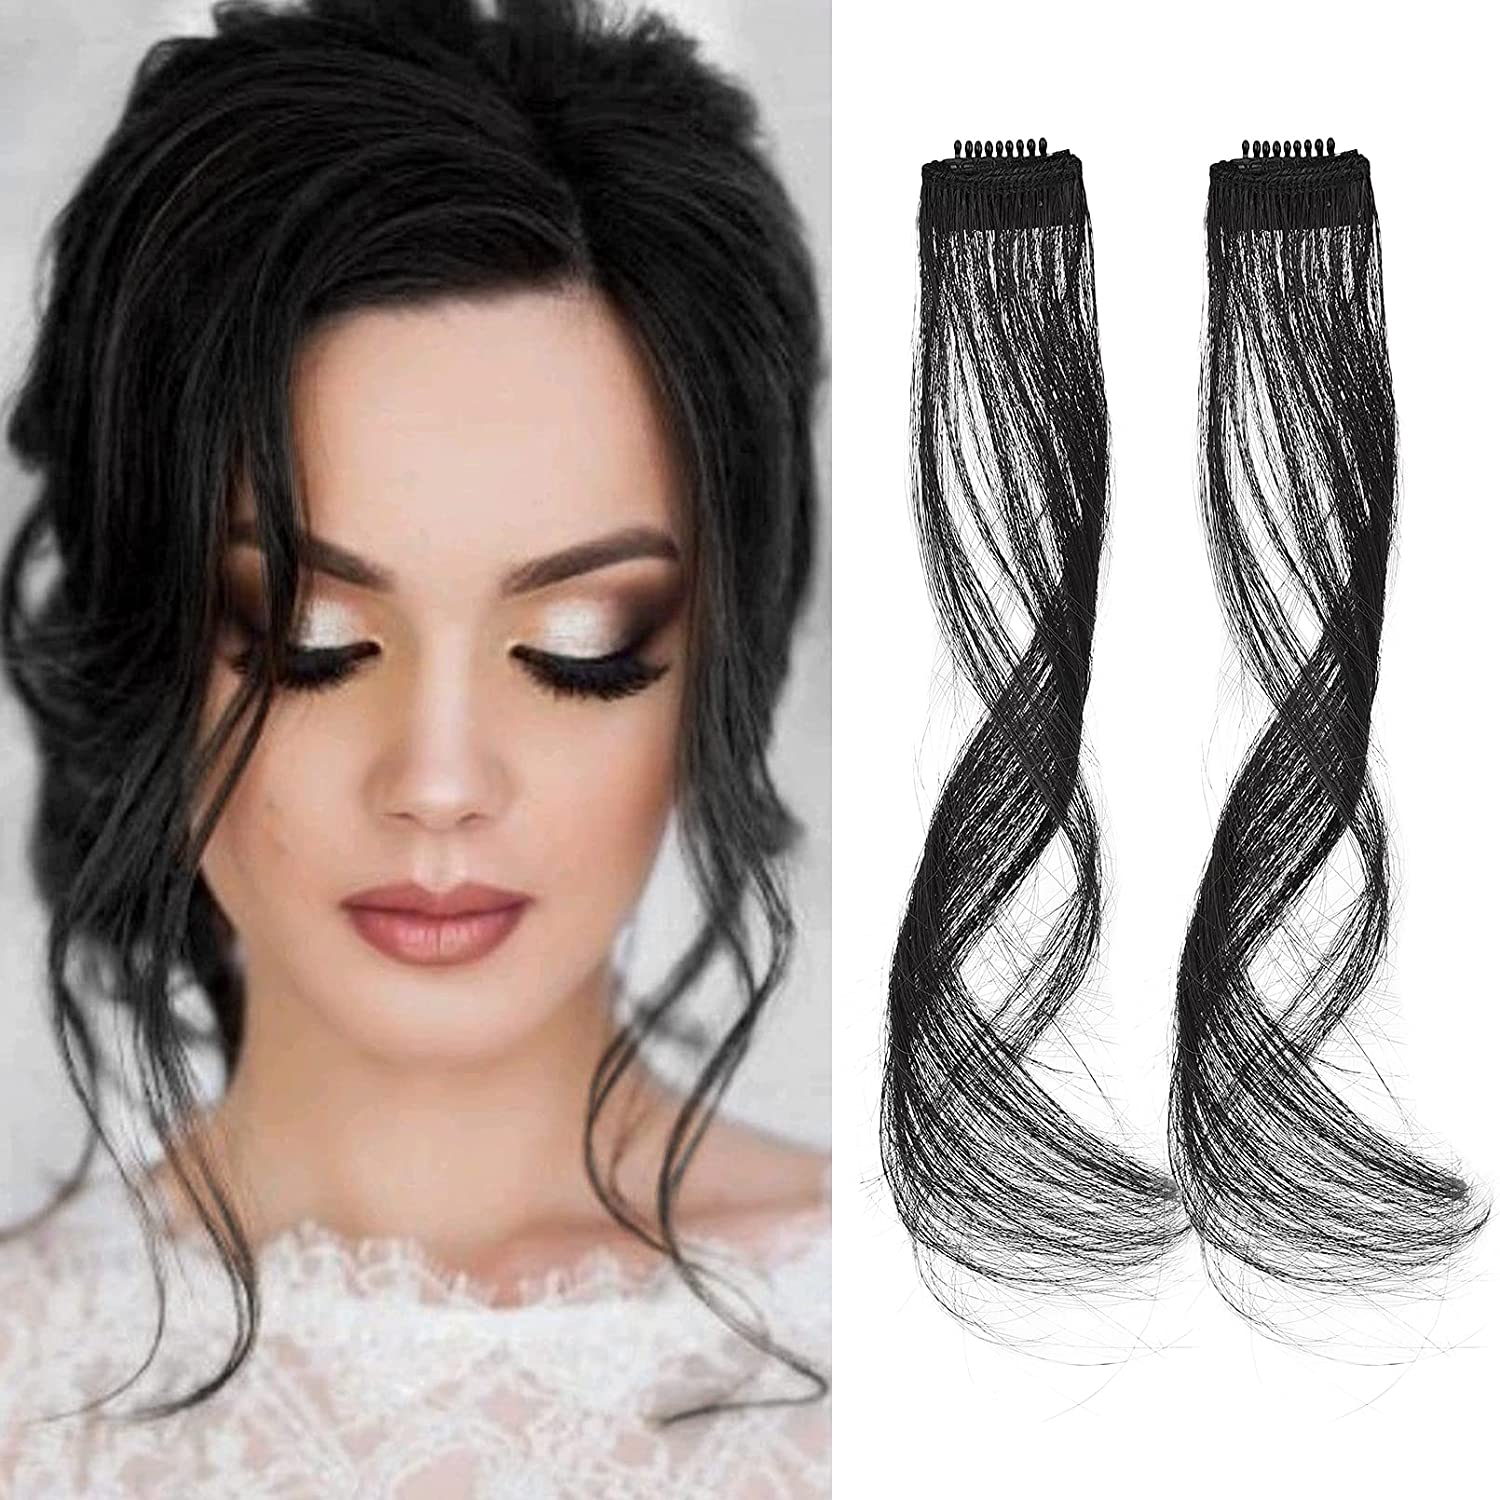 REECHO Long Side Air Bangs, Wavy Curly Clip in Bangs Front Side Bangs for Women Daily Use 2 PCS Set Long Temples